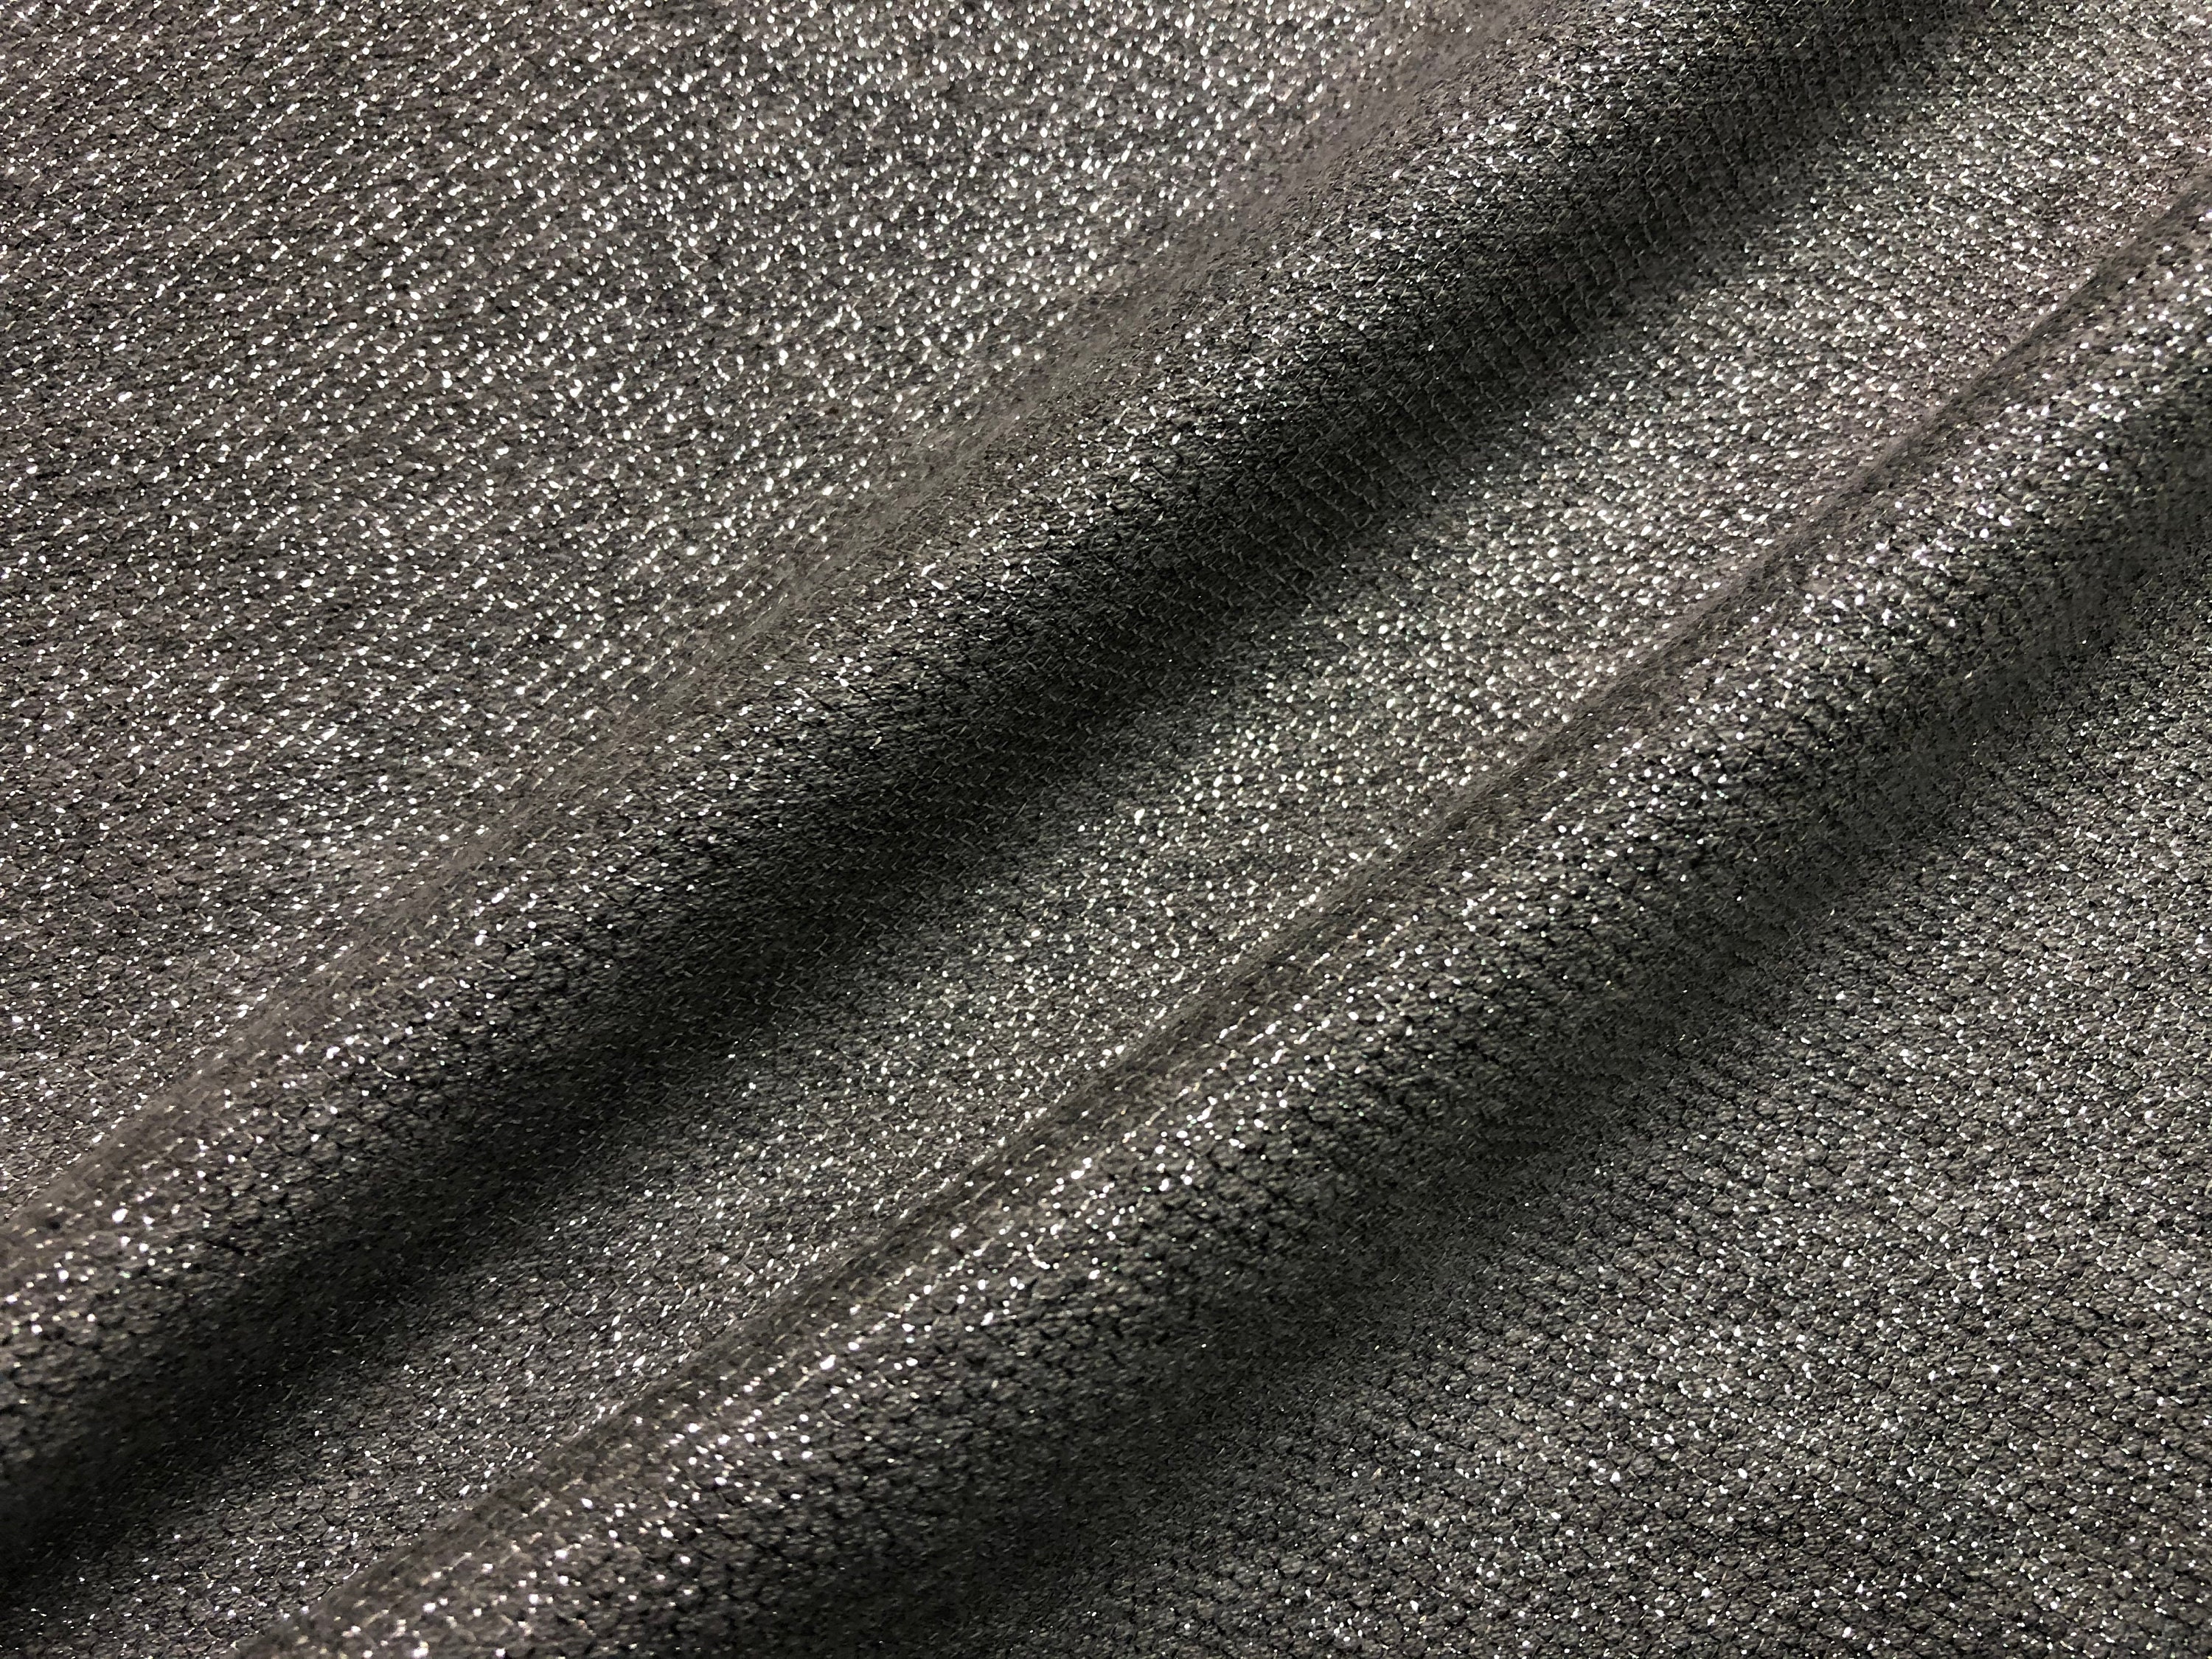 Cotton Blend Knit in Gray With Metallic Silver Dotted Pattern, 50 Wide, Price Is Per Yard